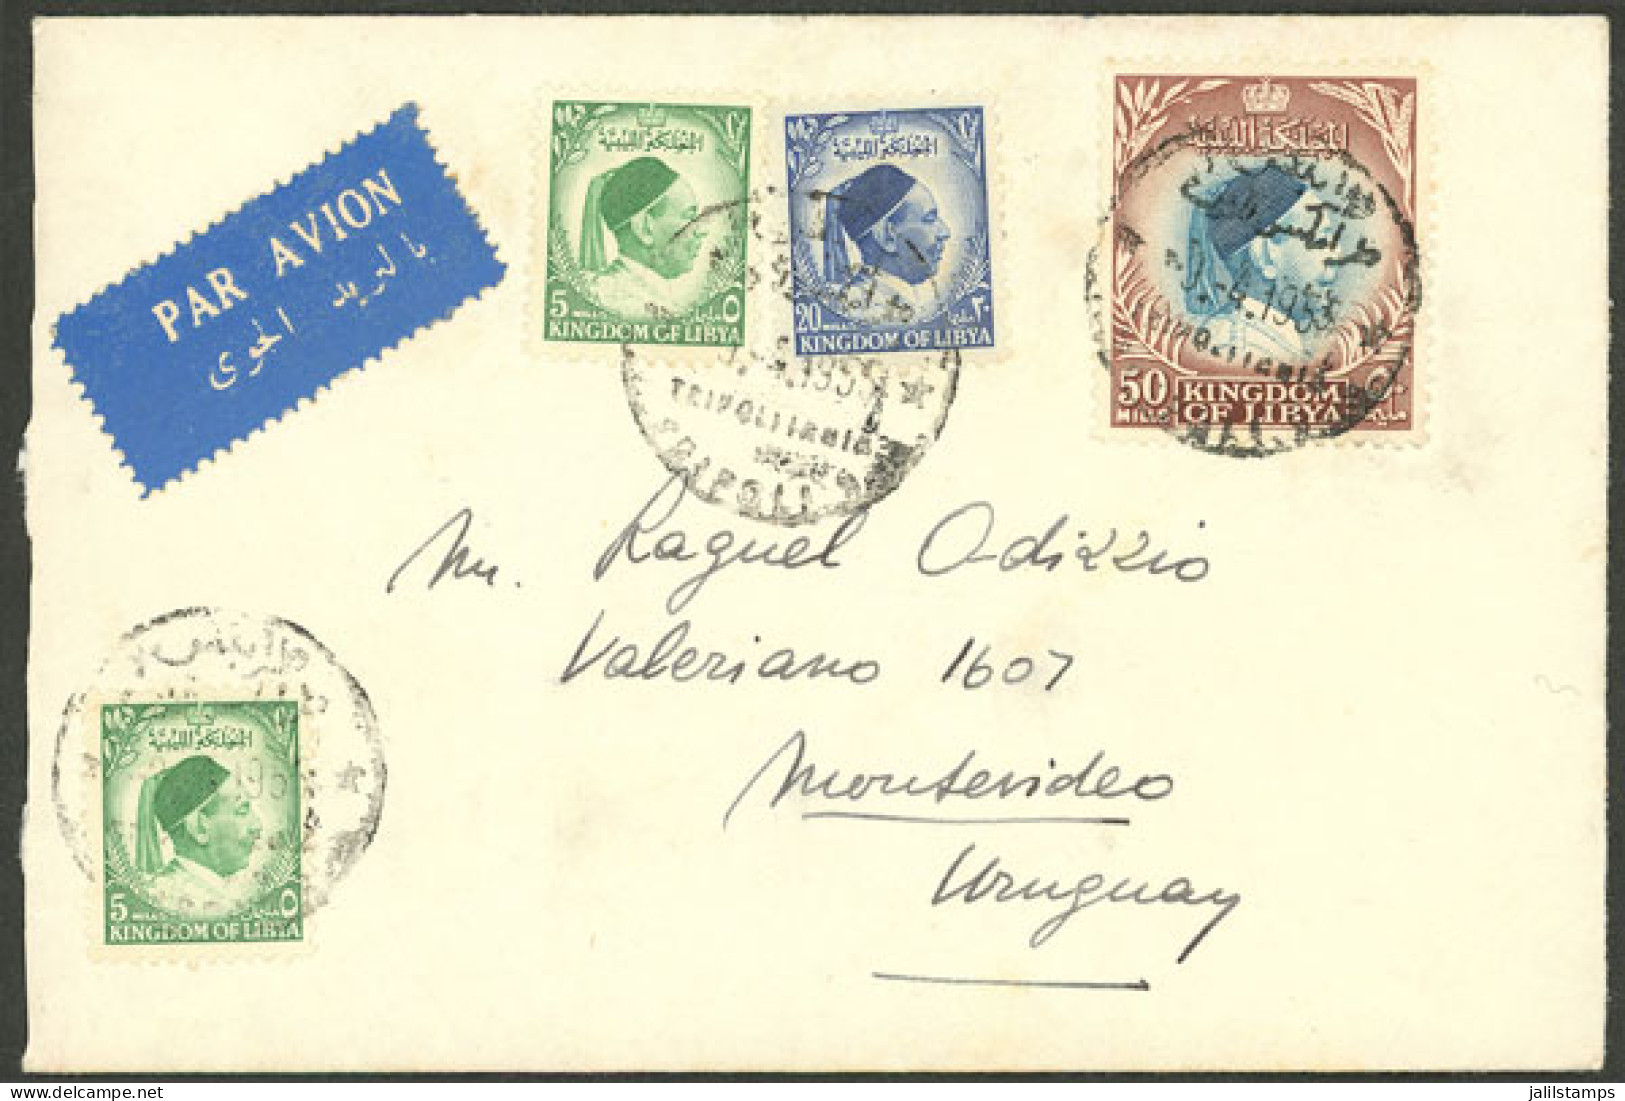 LIBYA: Airmail Cover Sent From Tripoli To Uruguay On 9/AP/1955, VF Quality! - Libye